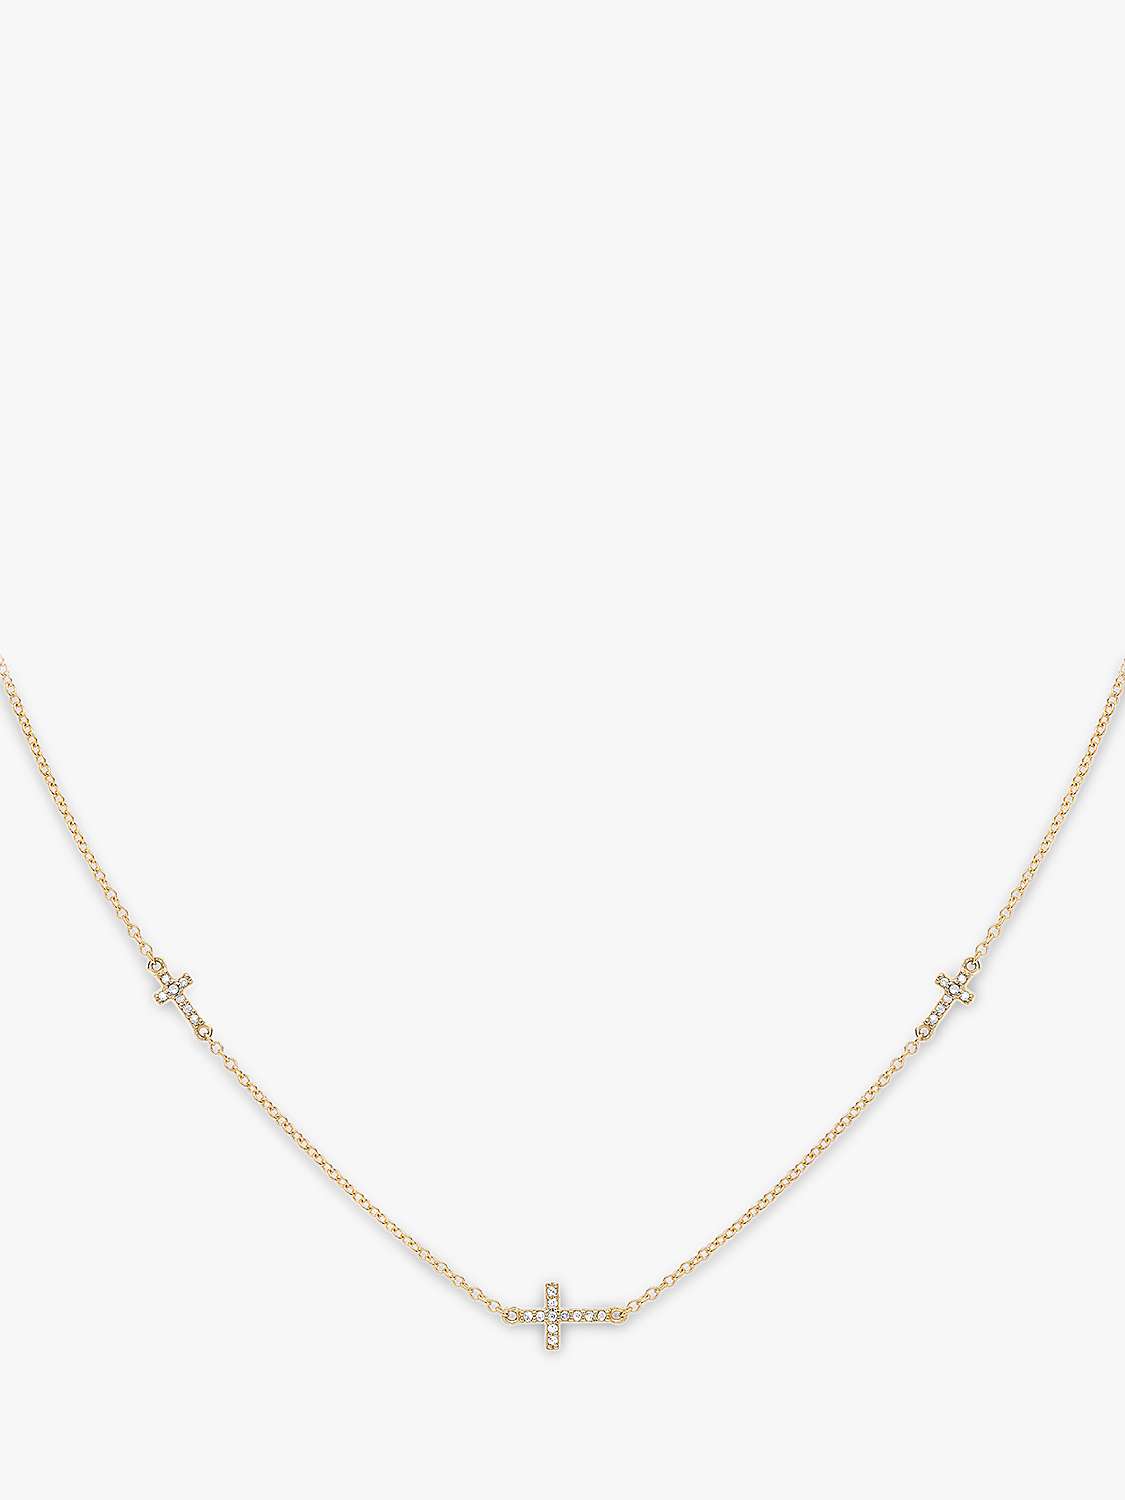 Buy IBB 9ct Gold Cubic Zirconia Triple Cross Chain Necklace Online at johnlewis.com